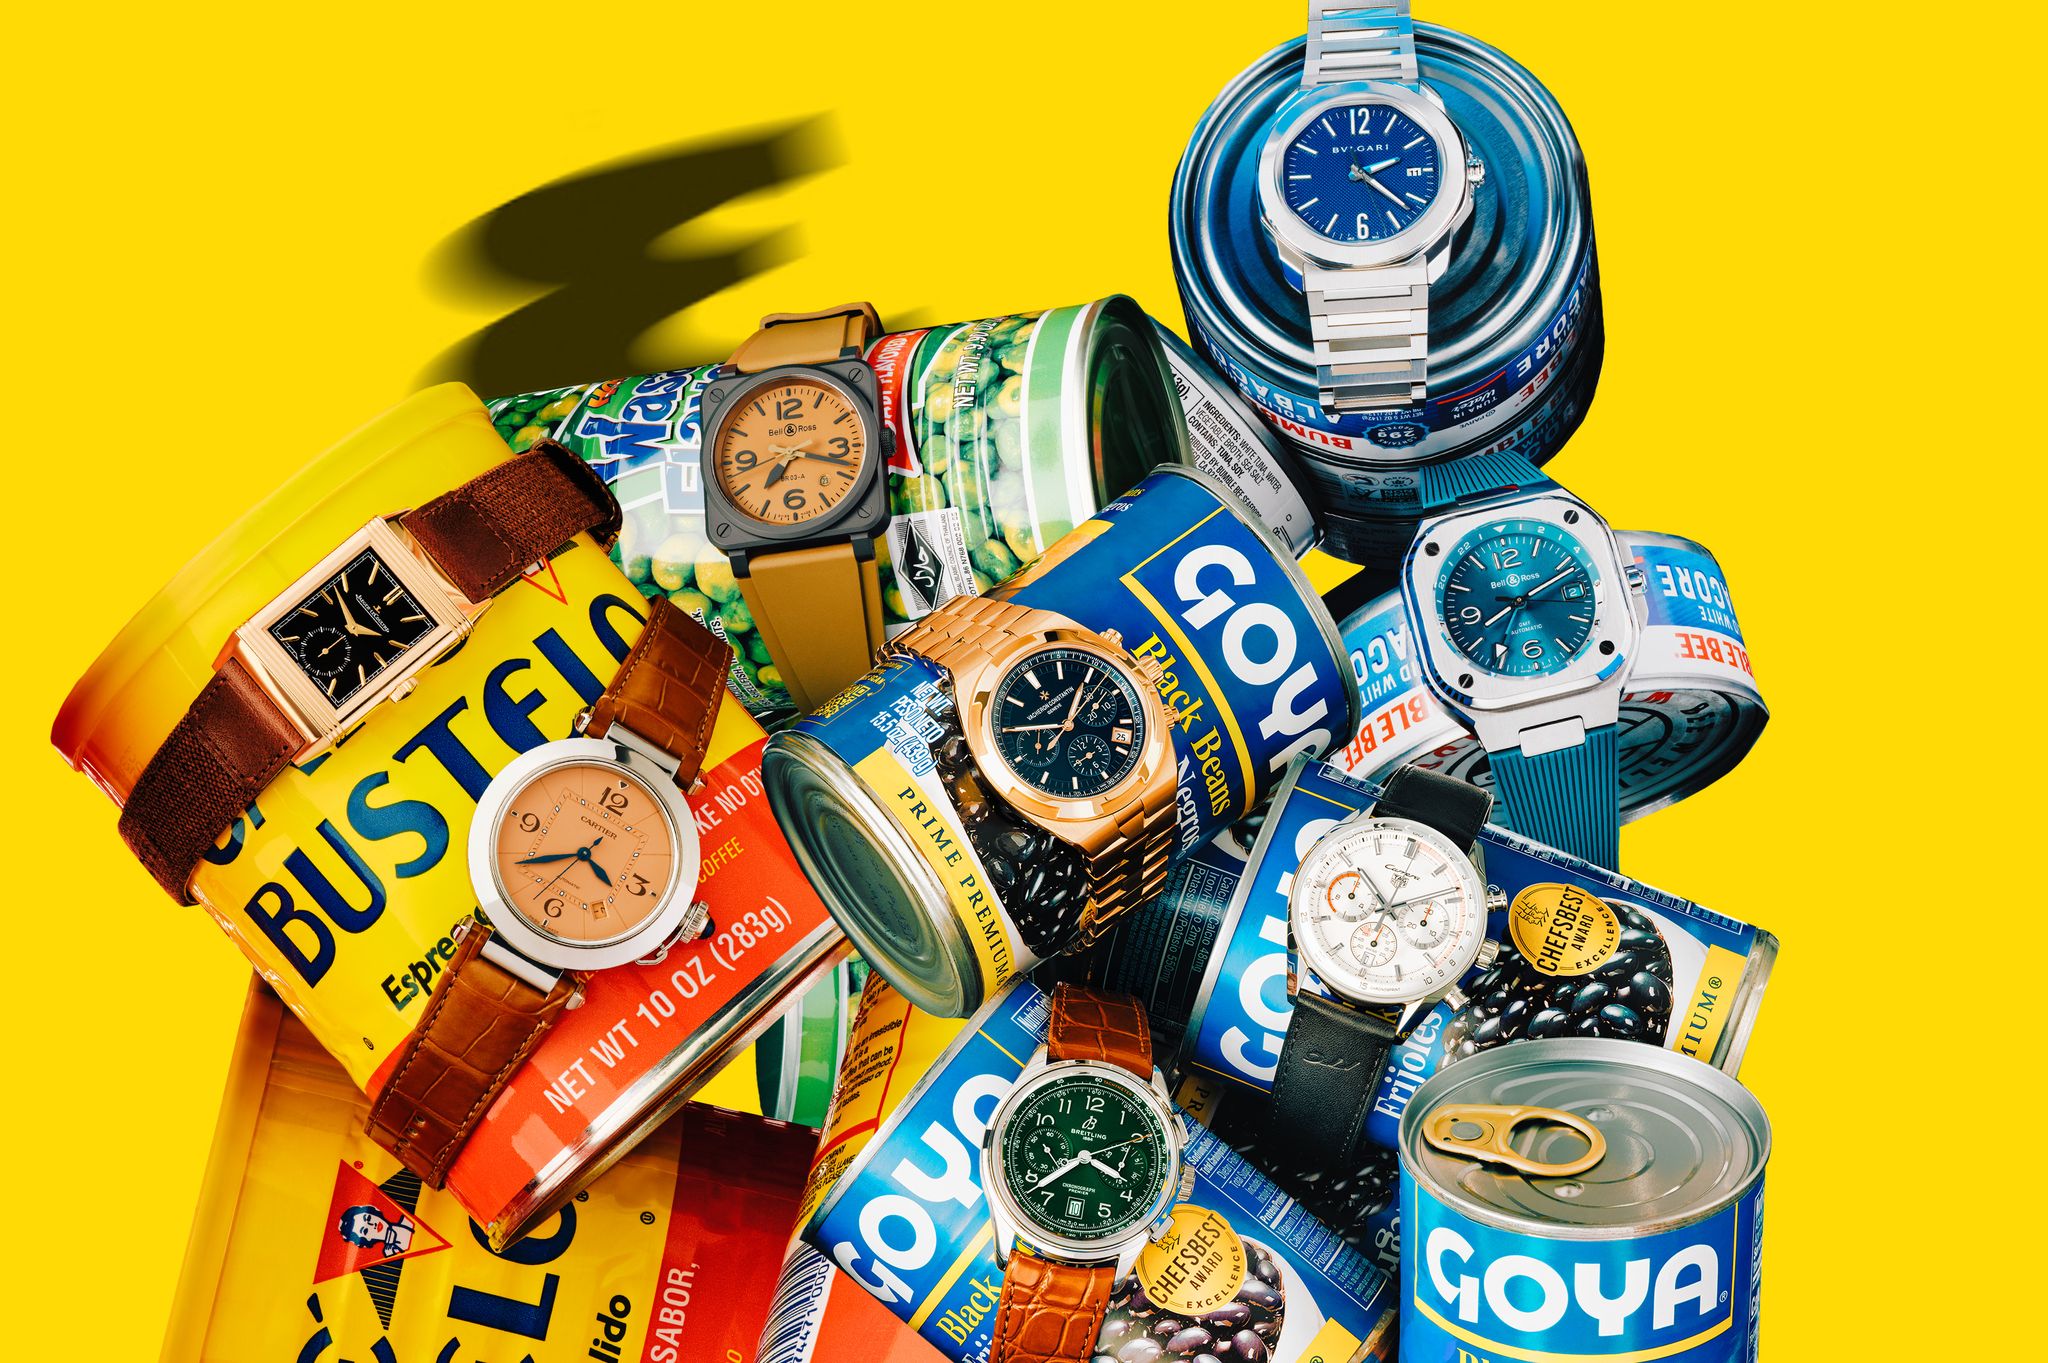 14 Watches With Staying Power